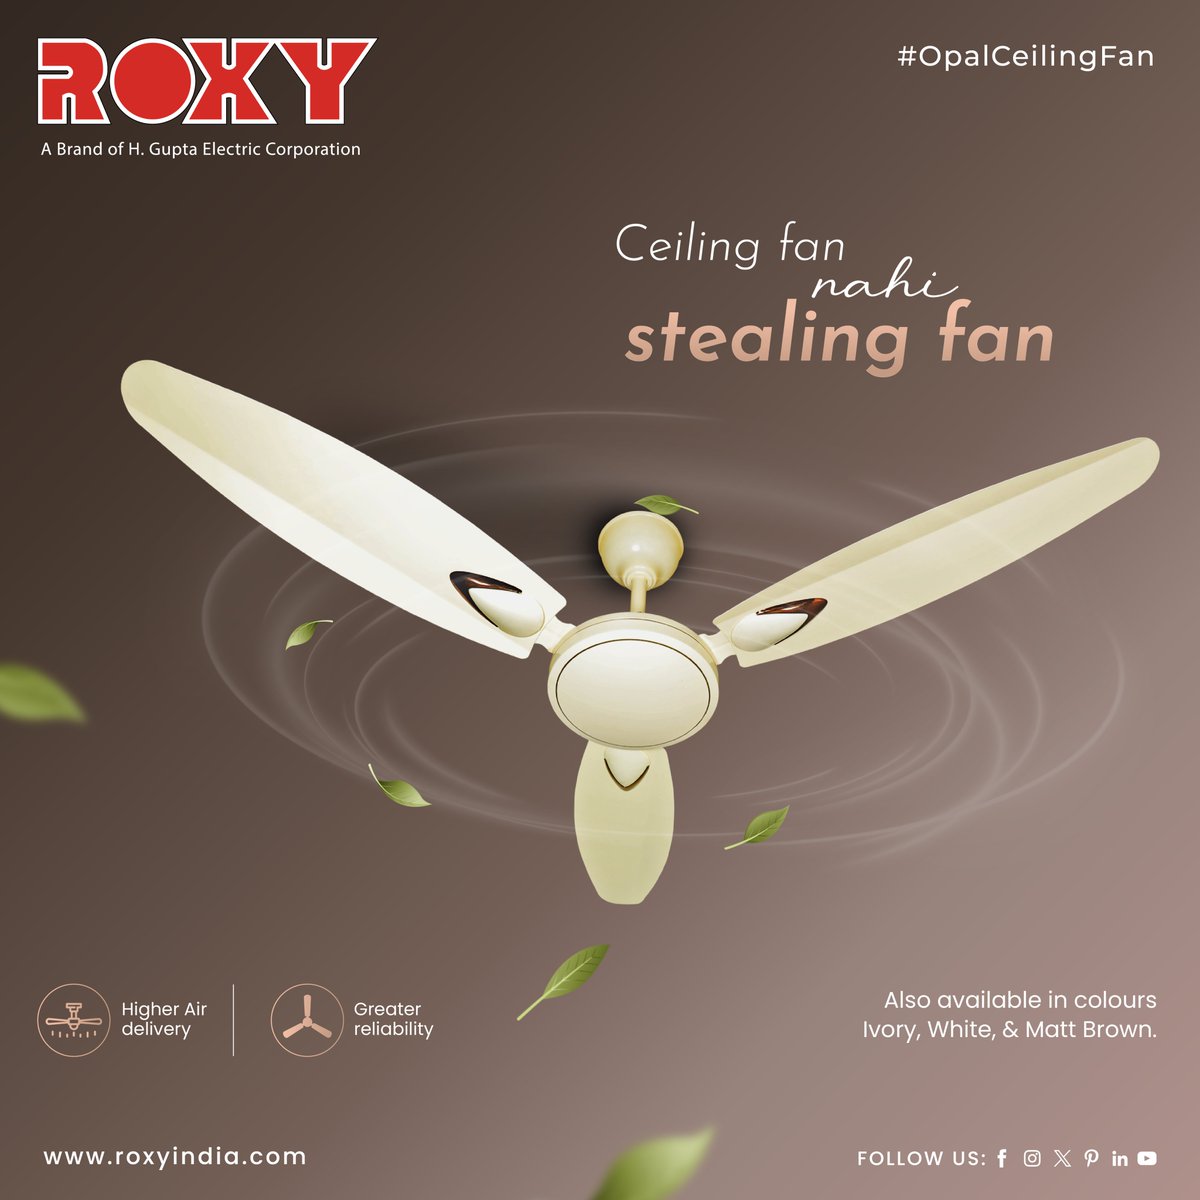 Ceiling fan nahi, stealing fan! 📷 Experience superior comfort with Roxy Opal ceiling fans, offering higher air delivery and unmatched reliability. . . . . For more visit:- roxyindia.com . . . . #RoxyOpal #StealingFan #SuperiorComfort #HighAirDelivery